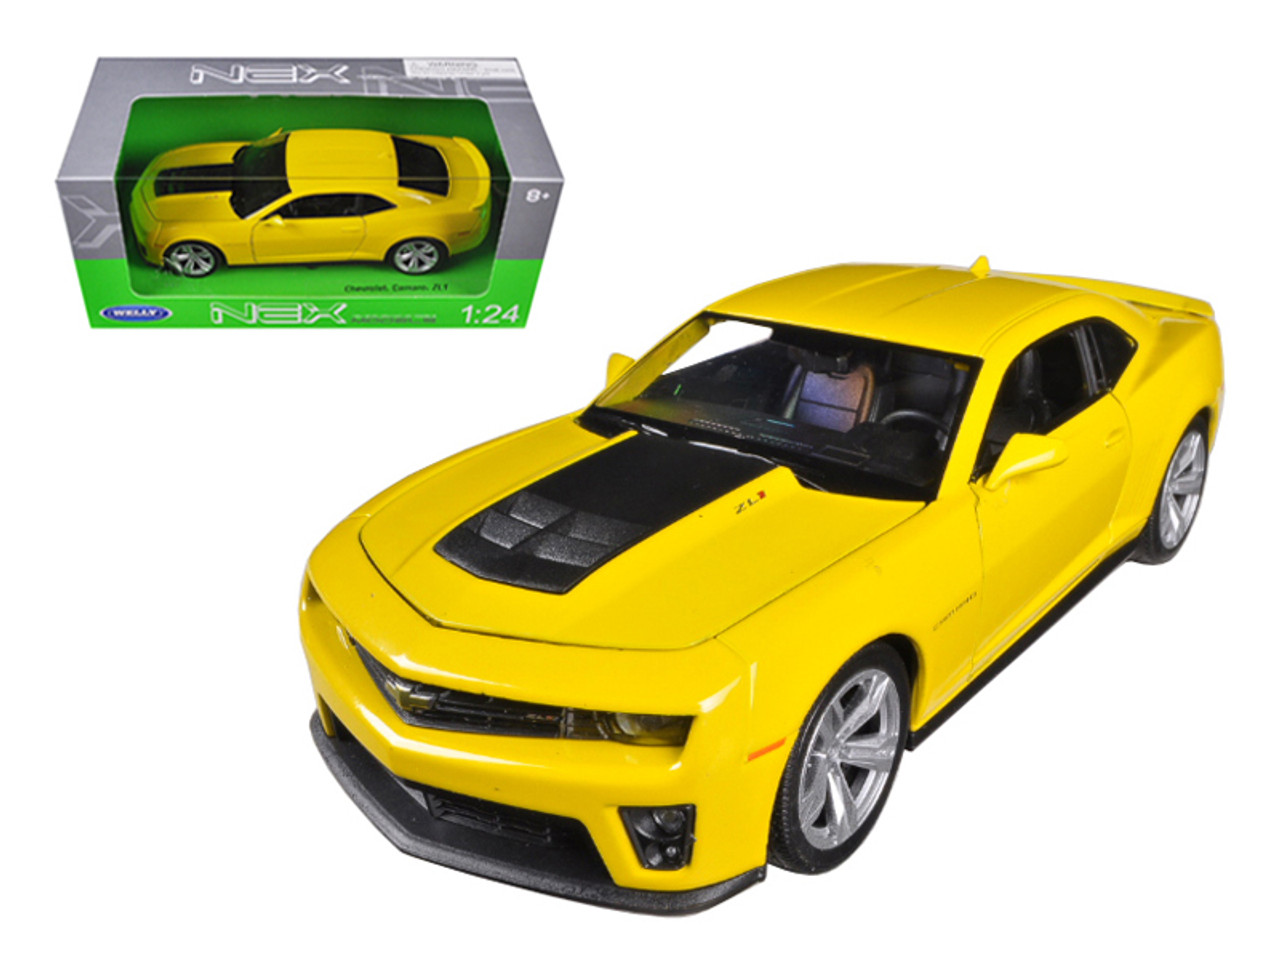 CHEVROLET CAMARO ZL1 V8 COUPE 2012 YELLOW WELLY 1/24 SCALE CAR DIECAST MODEL